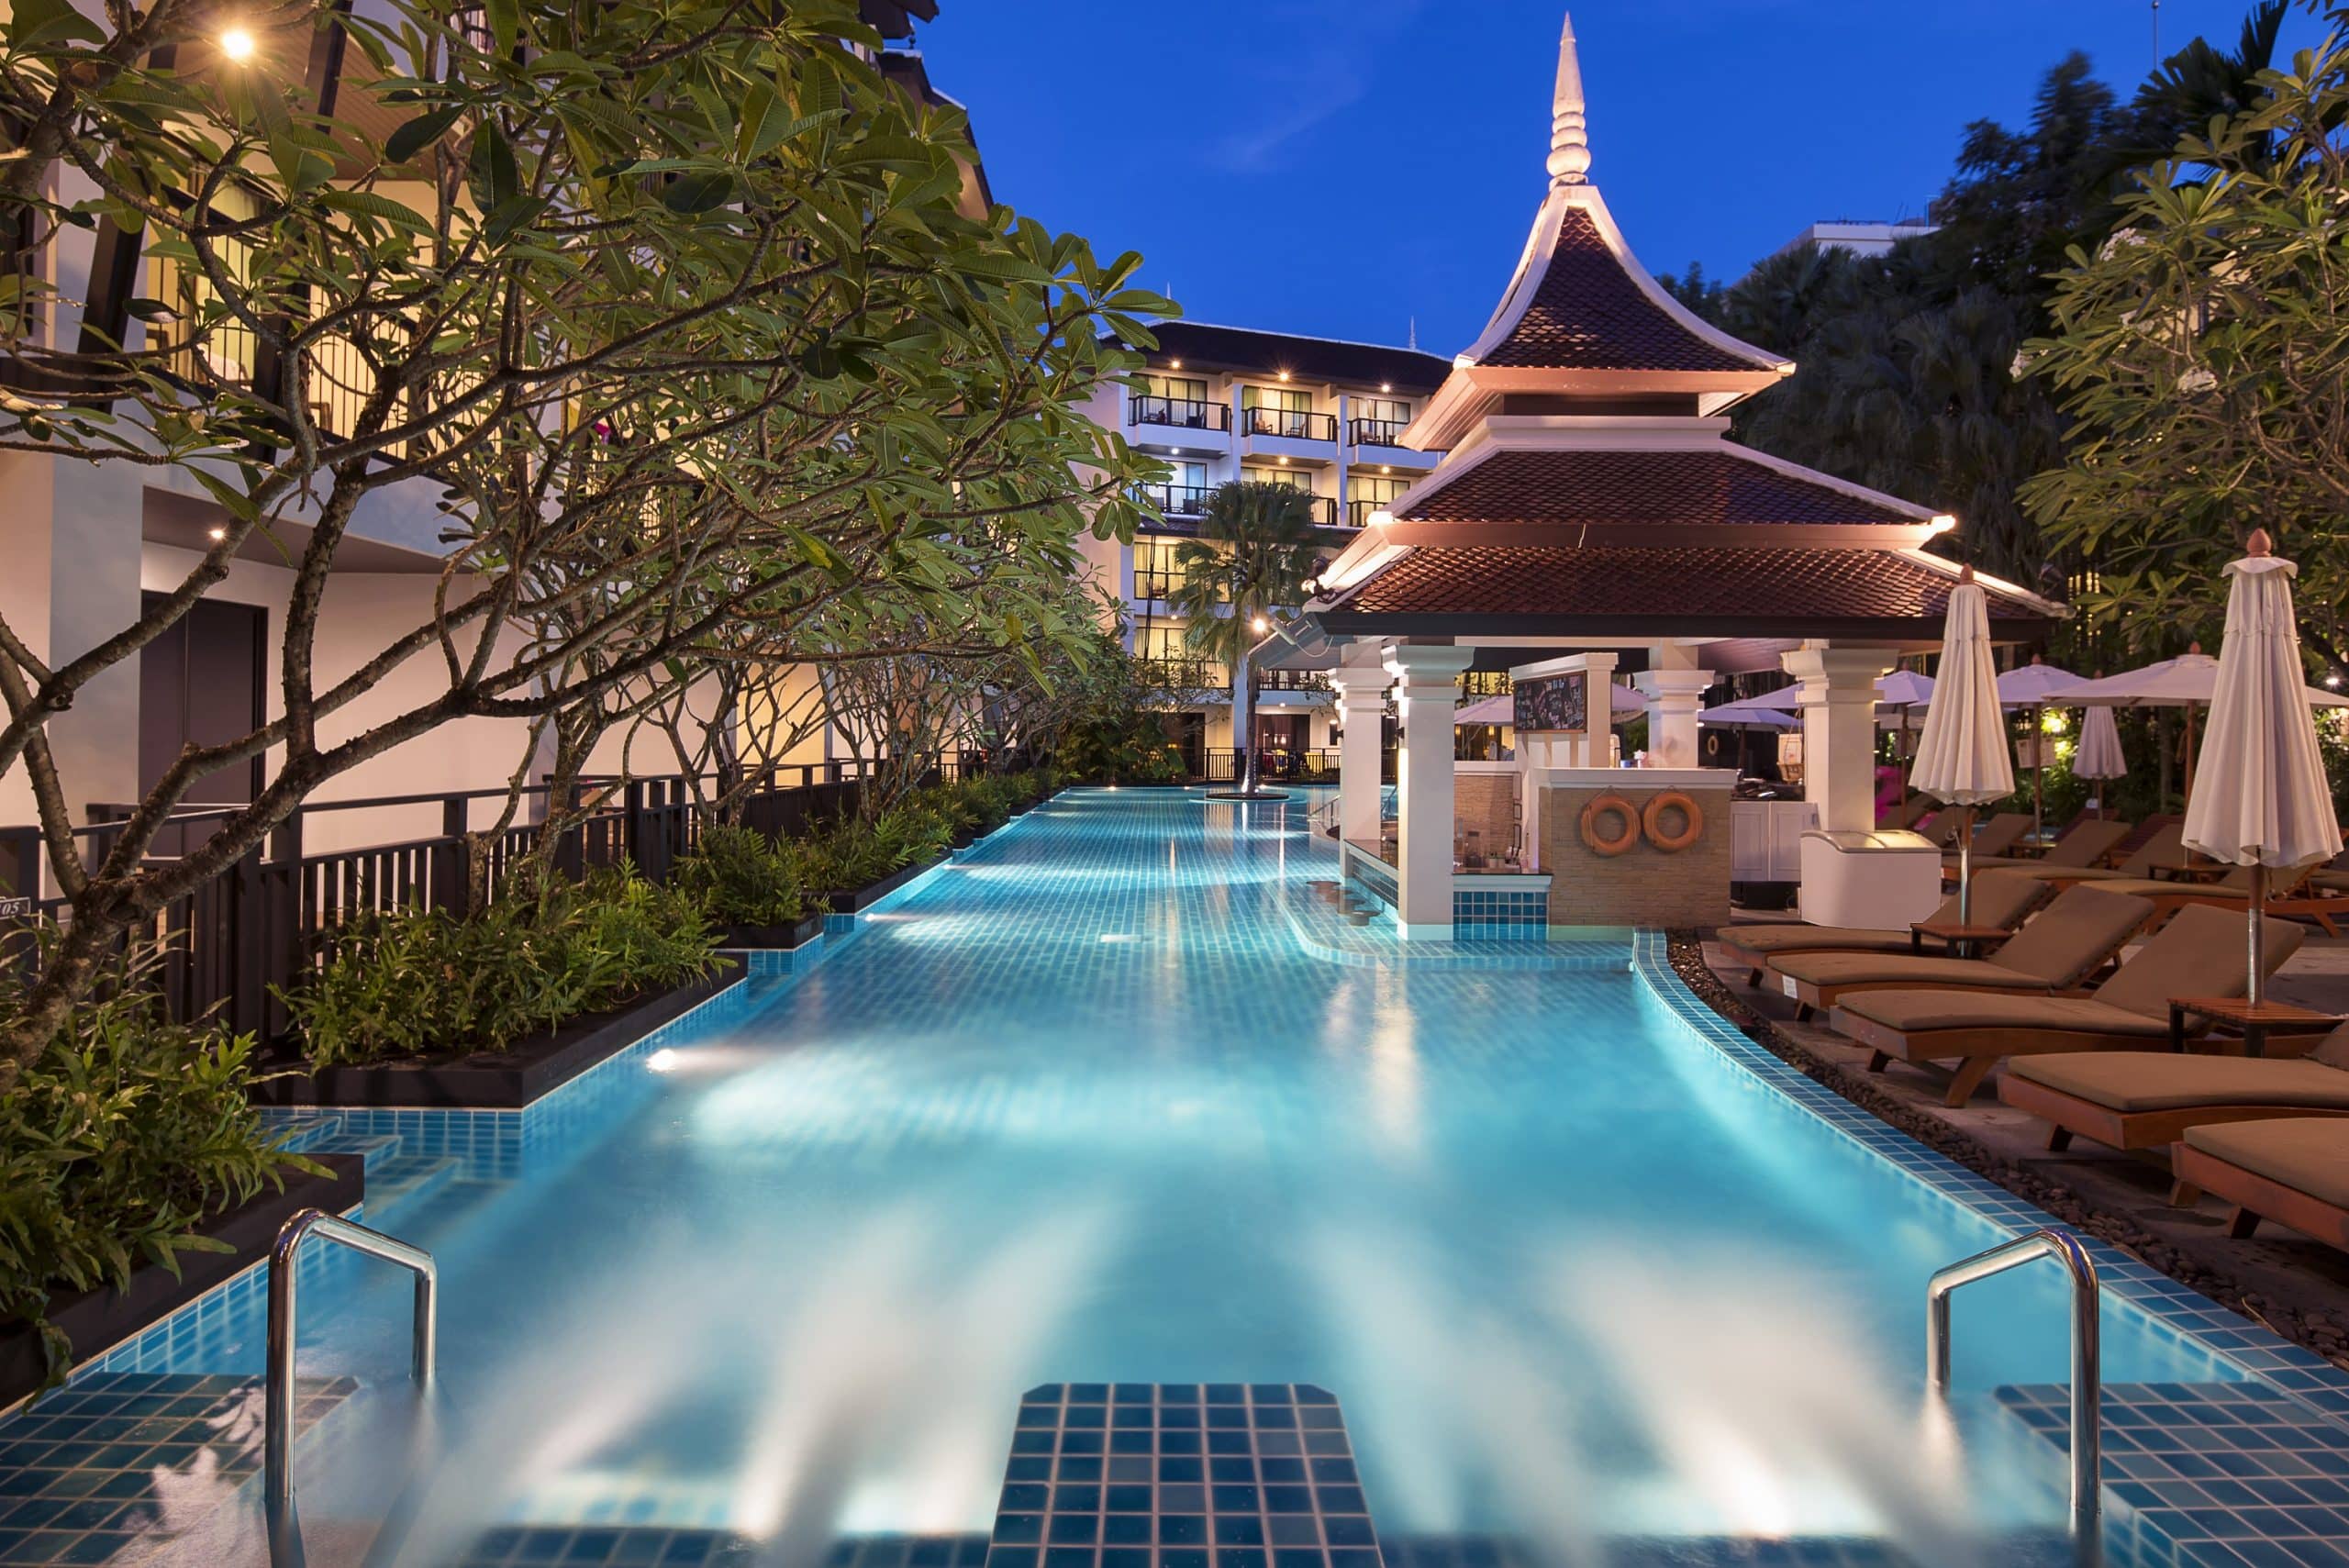 Centara Anda Dhevi Resort & Spa Krabi Reopens 15th November 2022 with The Place To Be offer